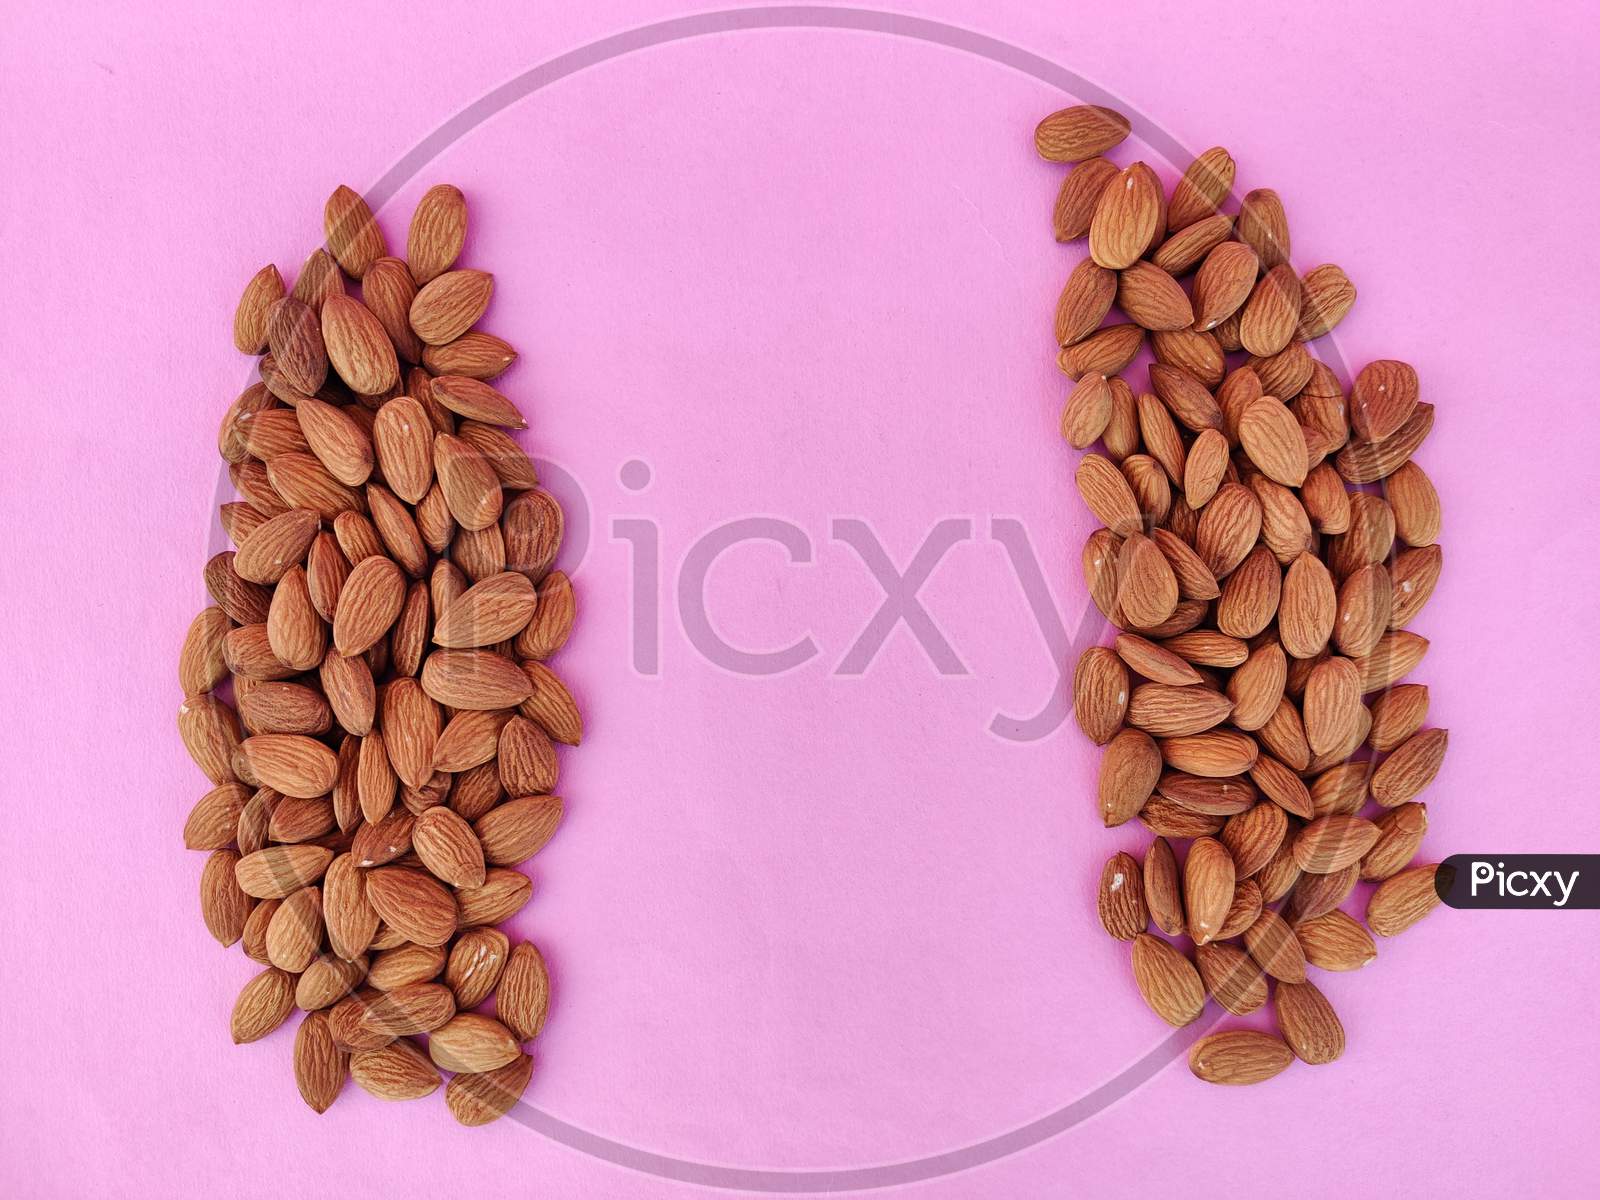 Heap Of Almonds Separated With Copy Space In Center. Isolated On Pink Background.